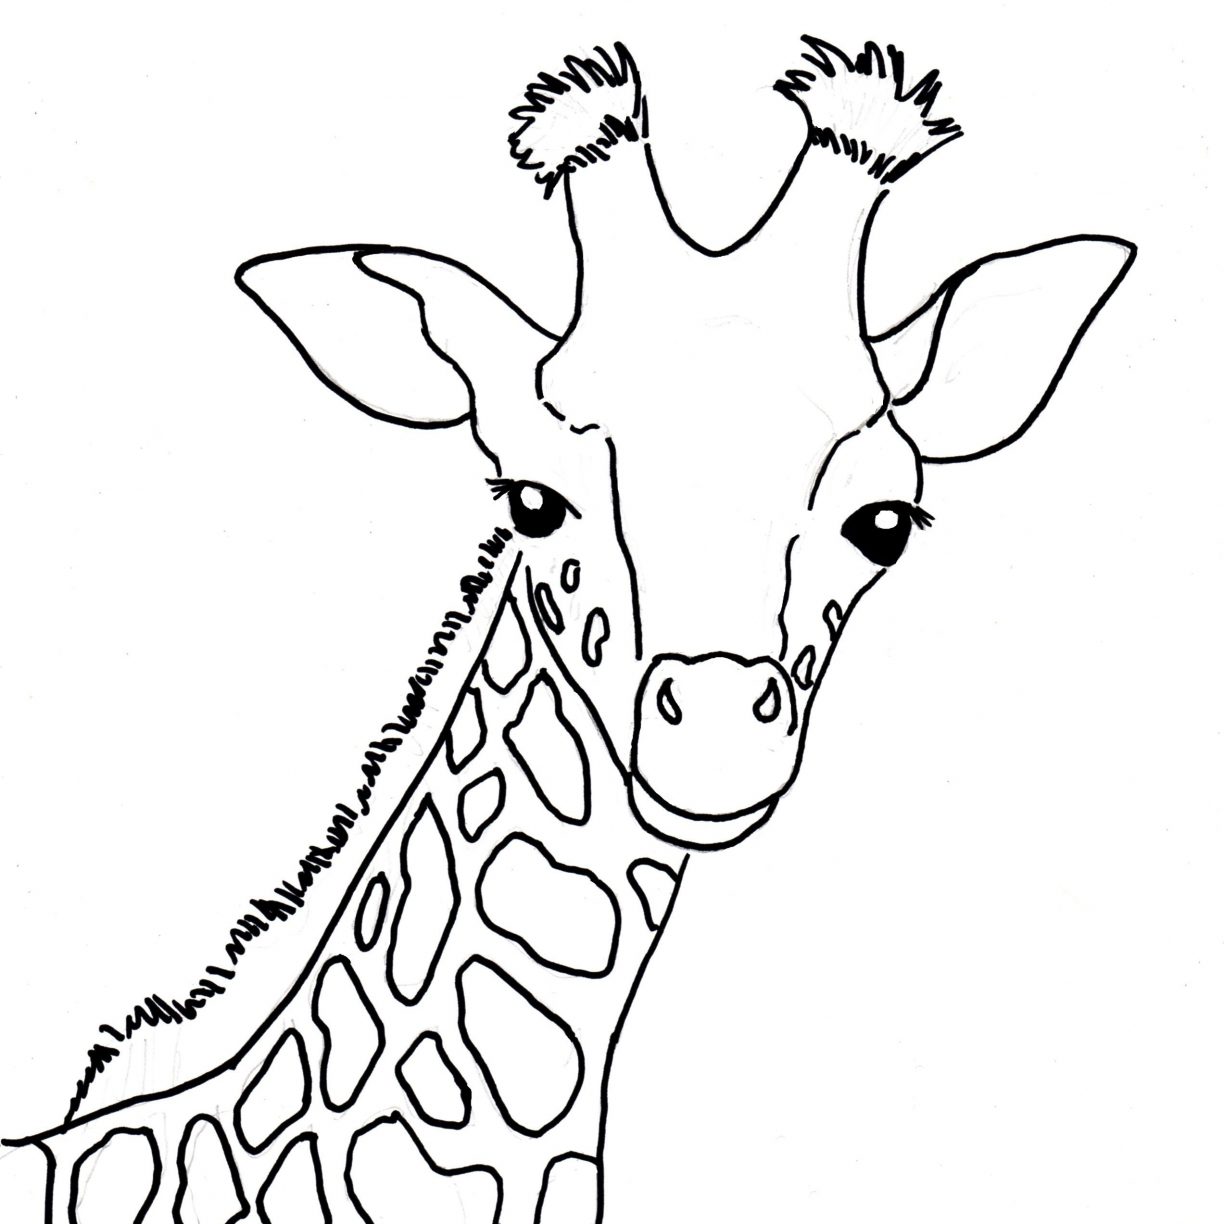 301 Unicorn Baby Giraffe Coloring Pages with Animal character